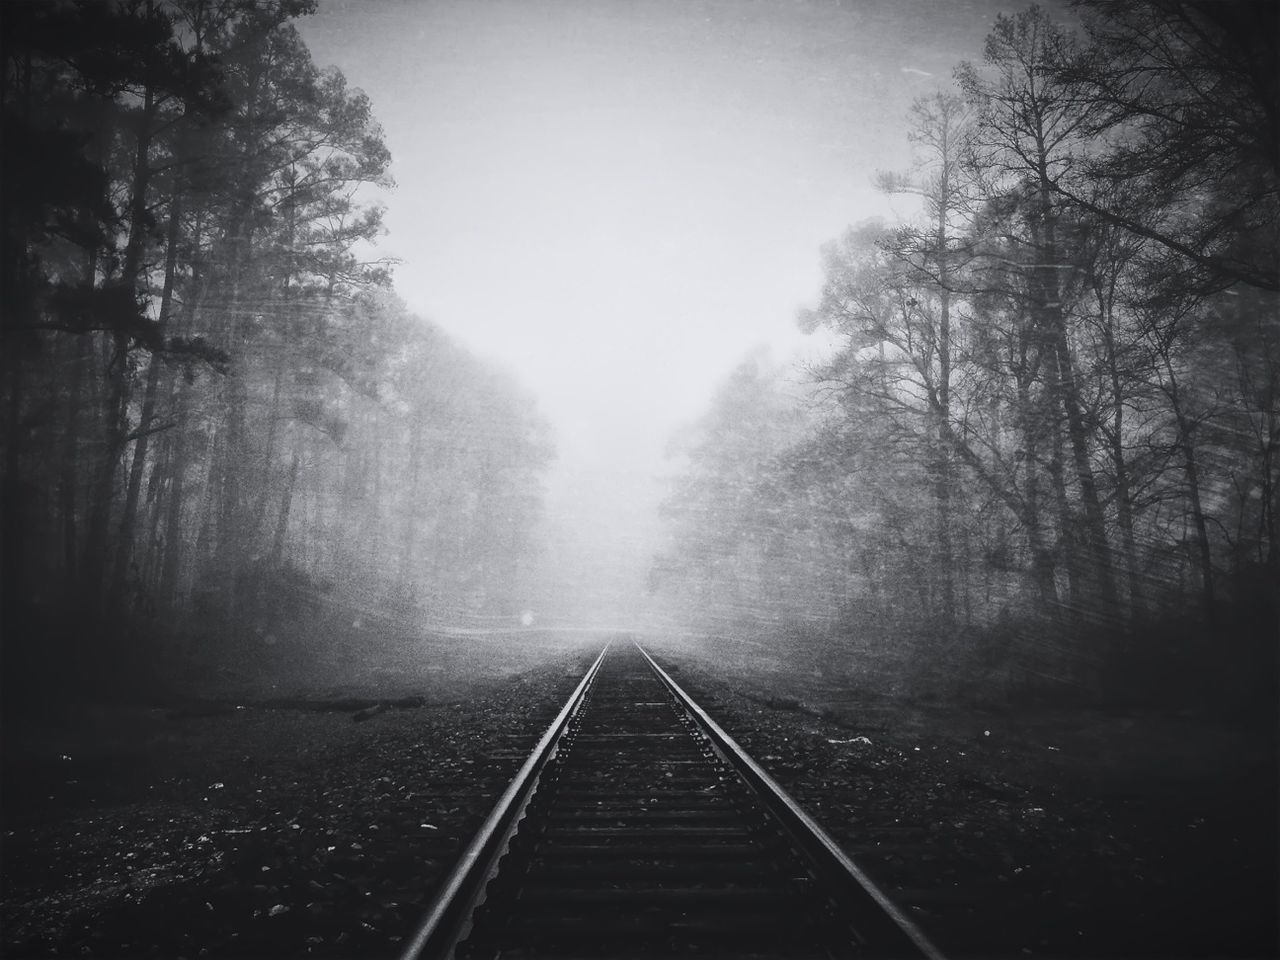 railroad track, the way forward, transportation, tree, rail transportation, diminishing perspective, vanishing point, sky, fog, forest, tranquility, railway track, nature, day, public transportation, tranquil scene, straight, outdoors, no people